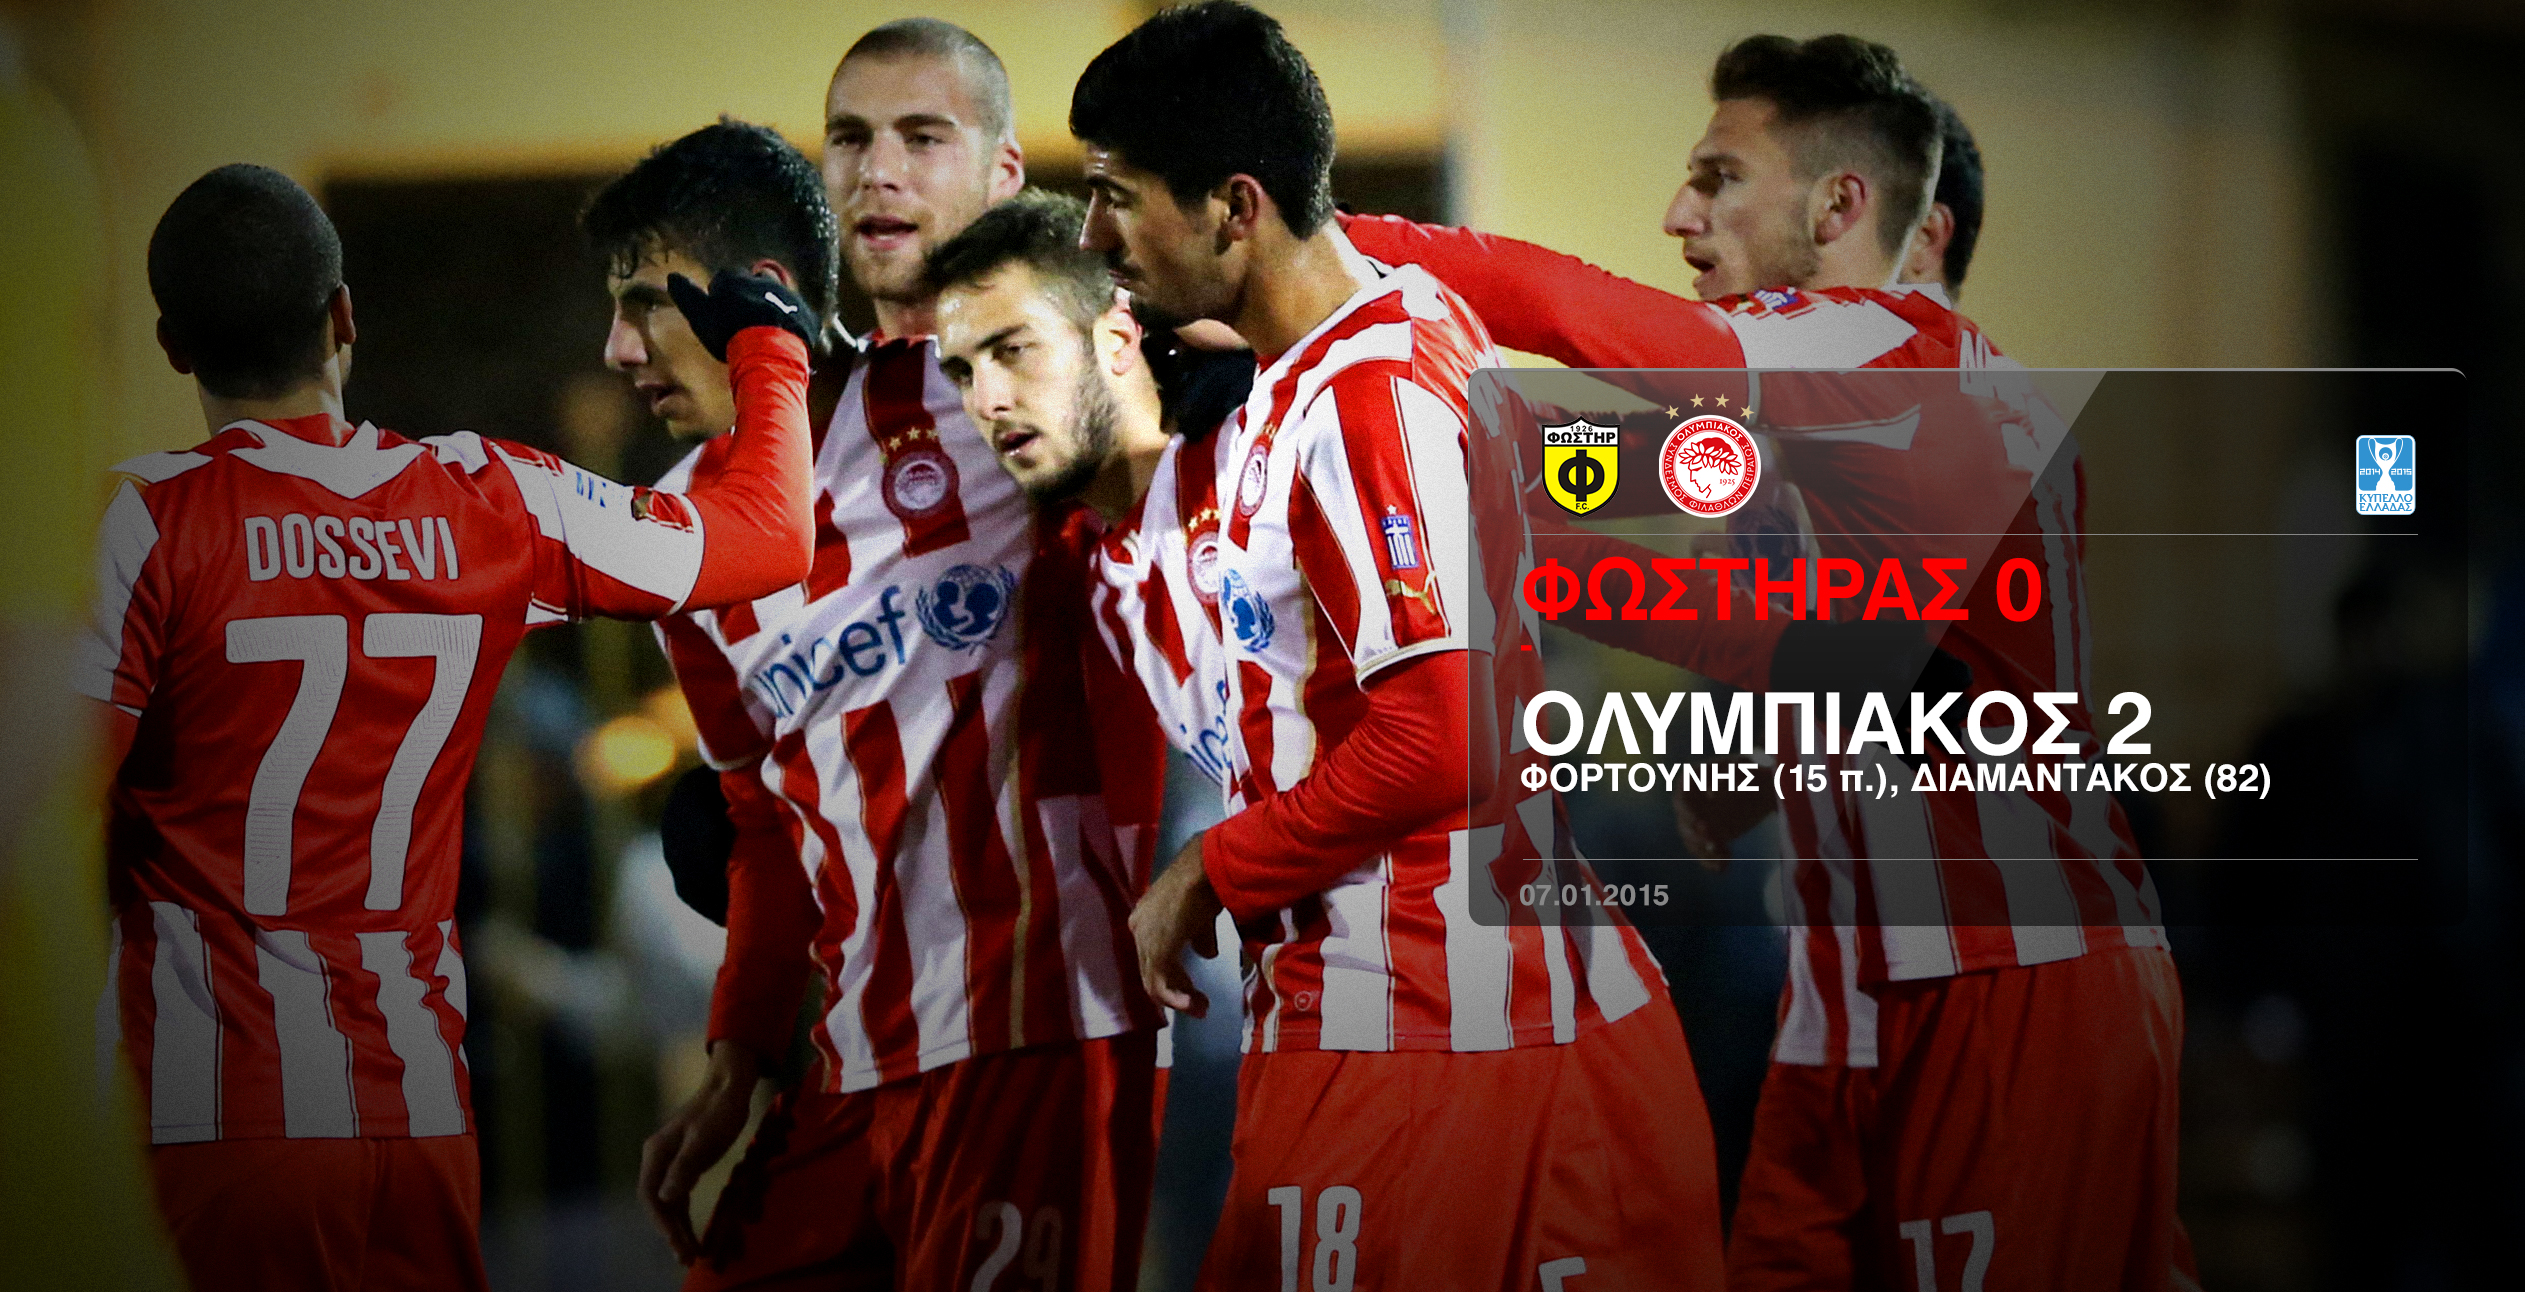 Olympiacos qualify in the next round of the Greek Cup!